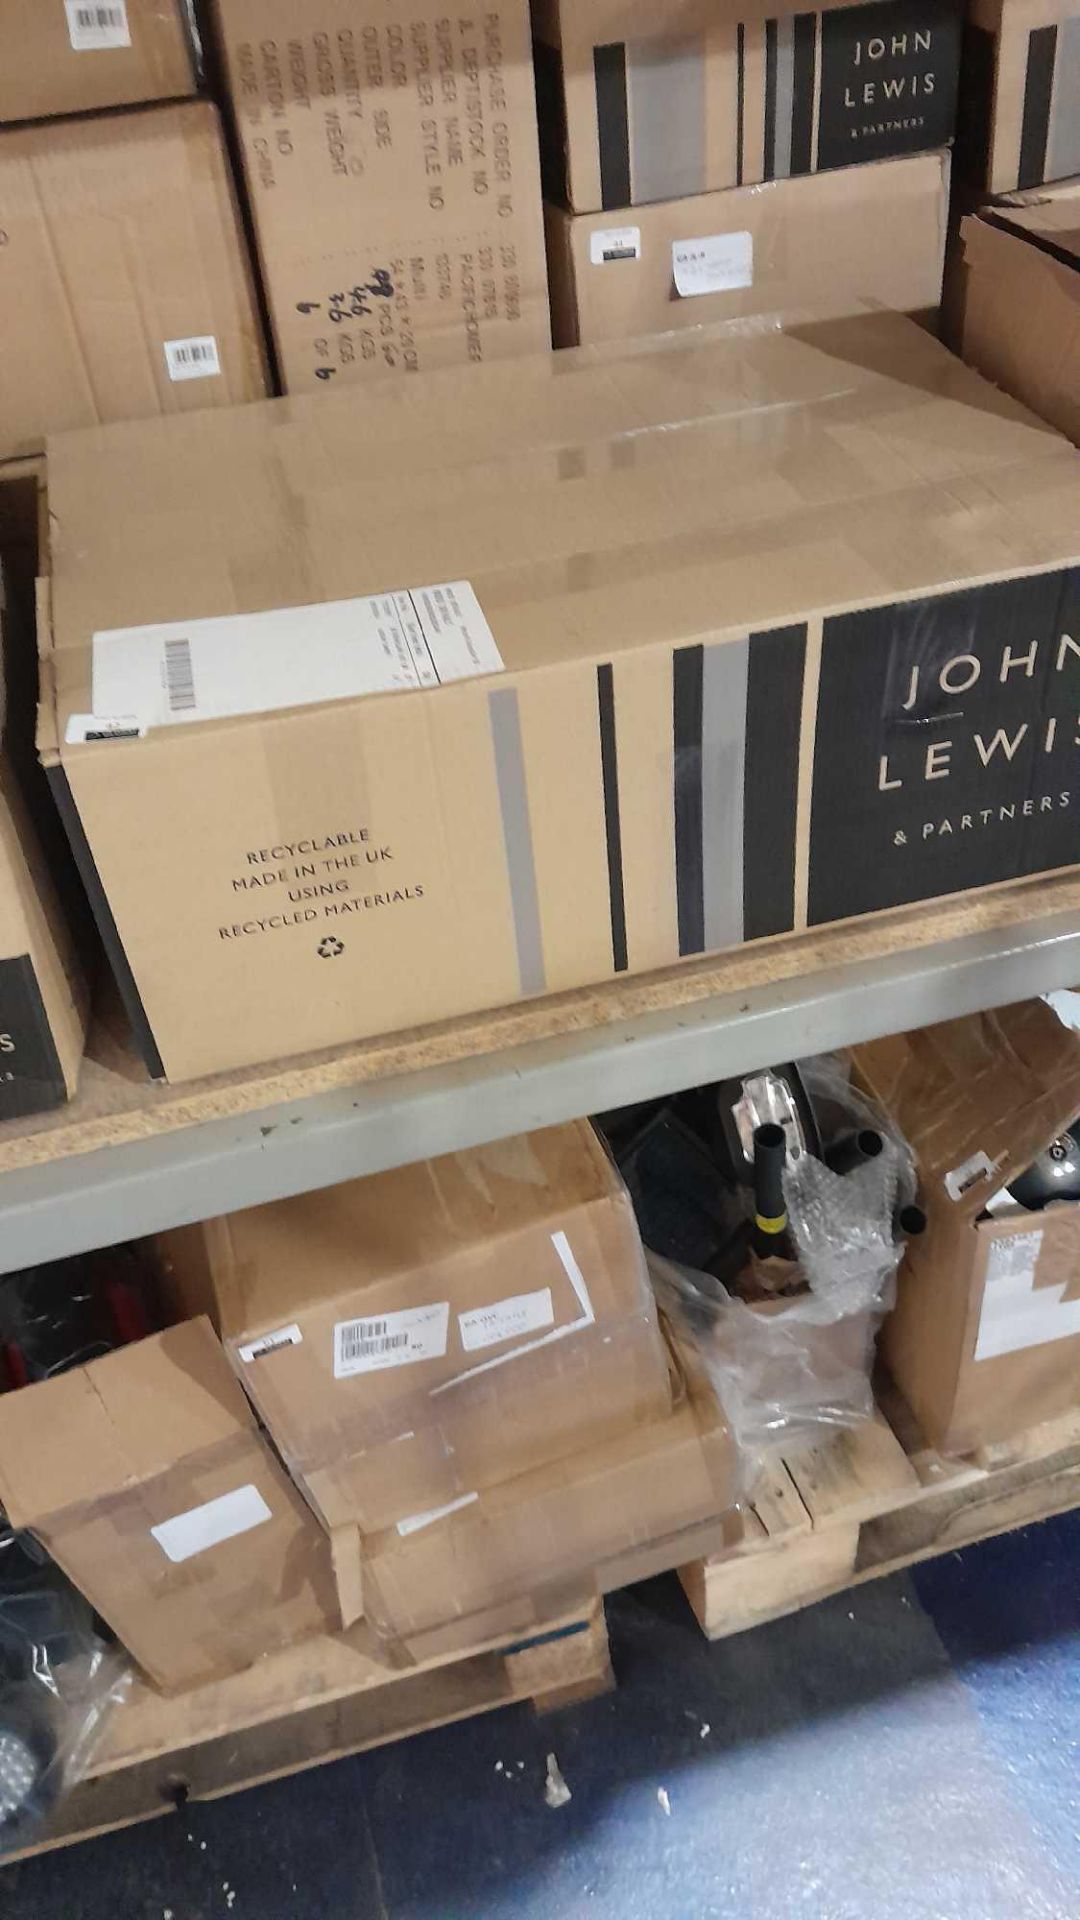 RRP £150 Box To Contain 36 Brand New John Lewis Meat Thermometers - Image 3 of 3